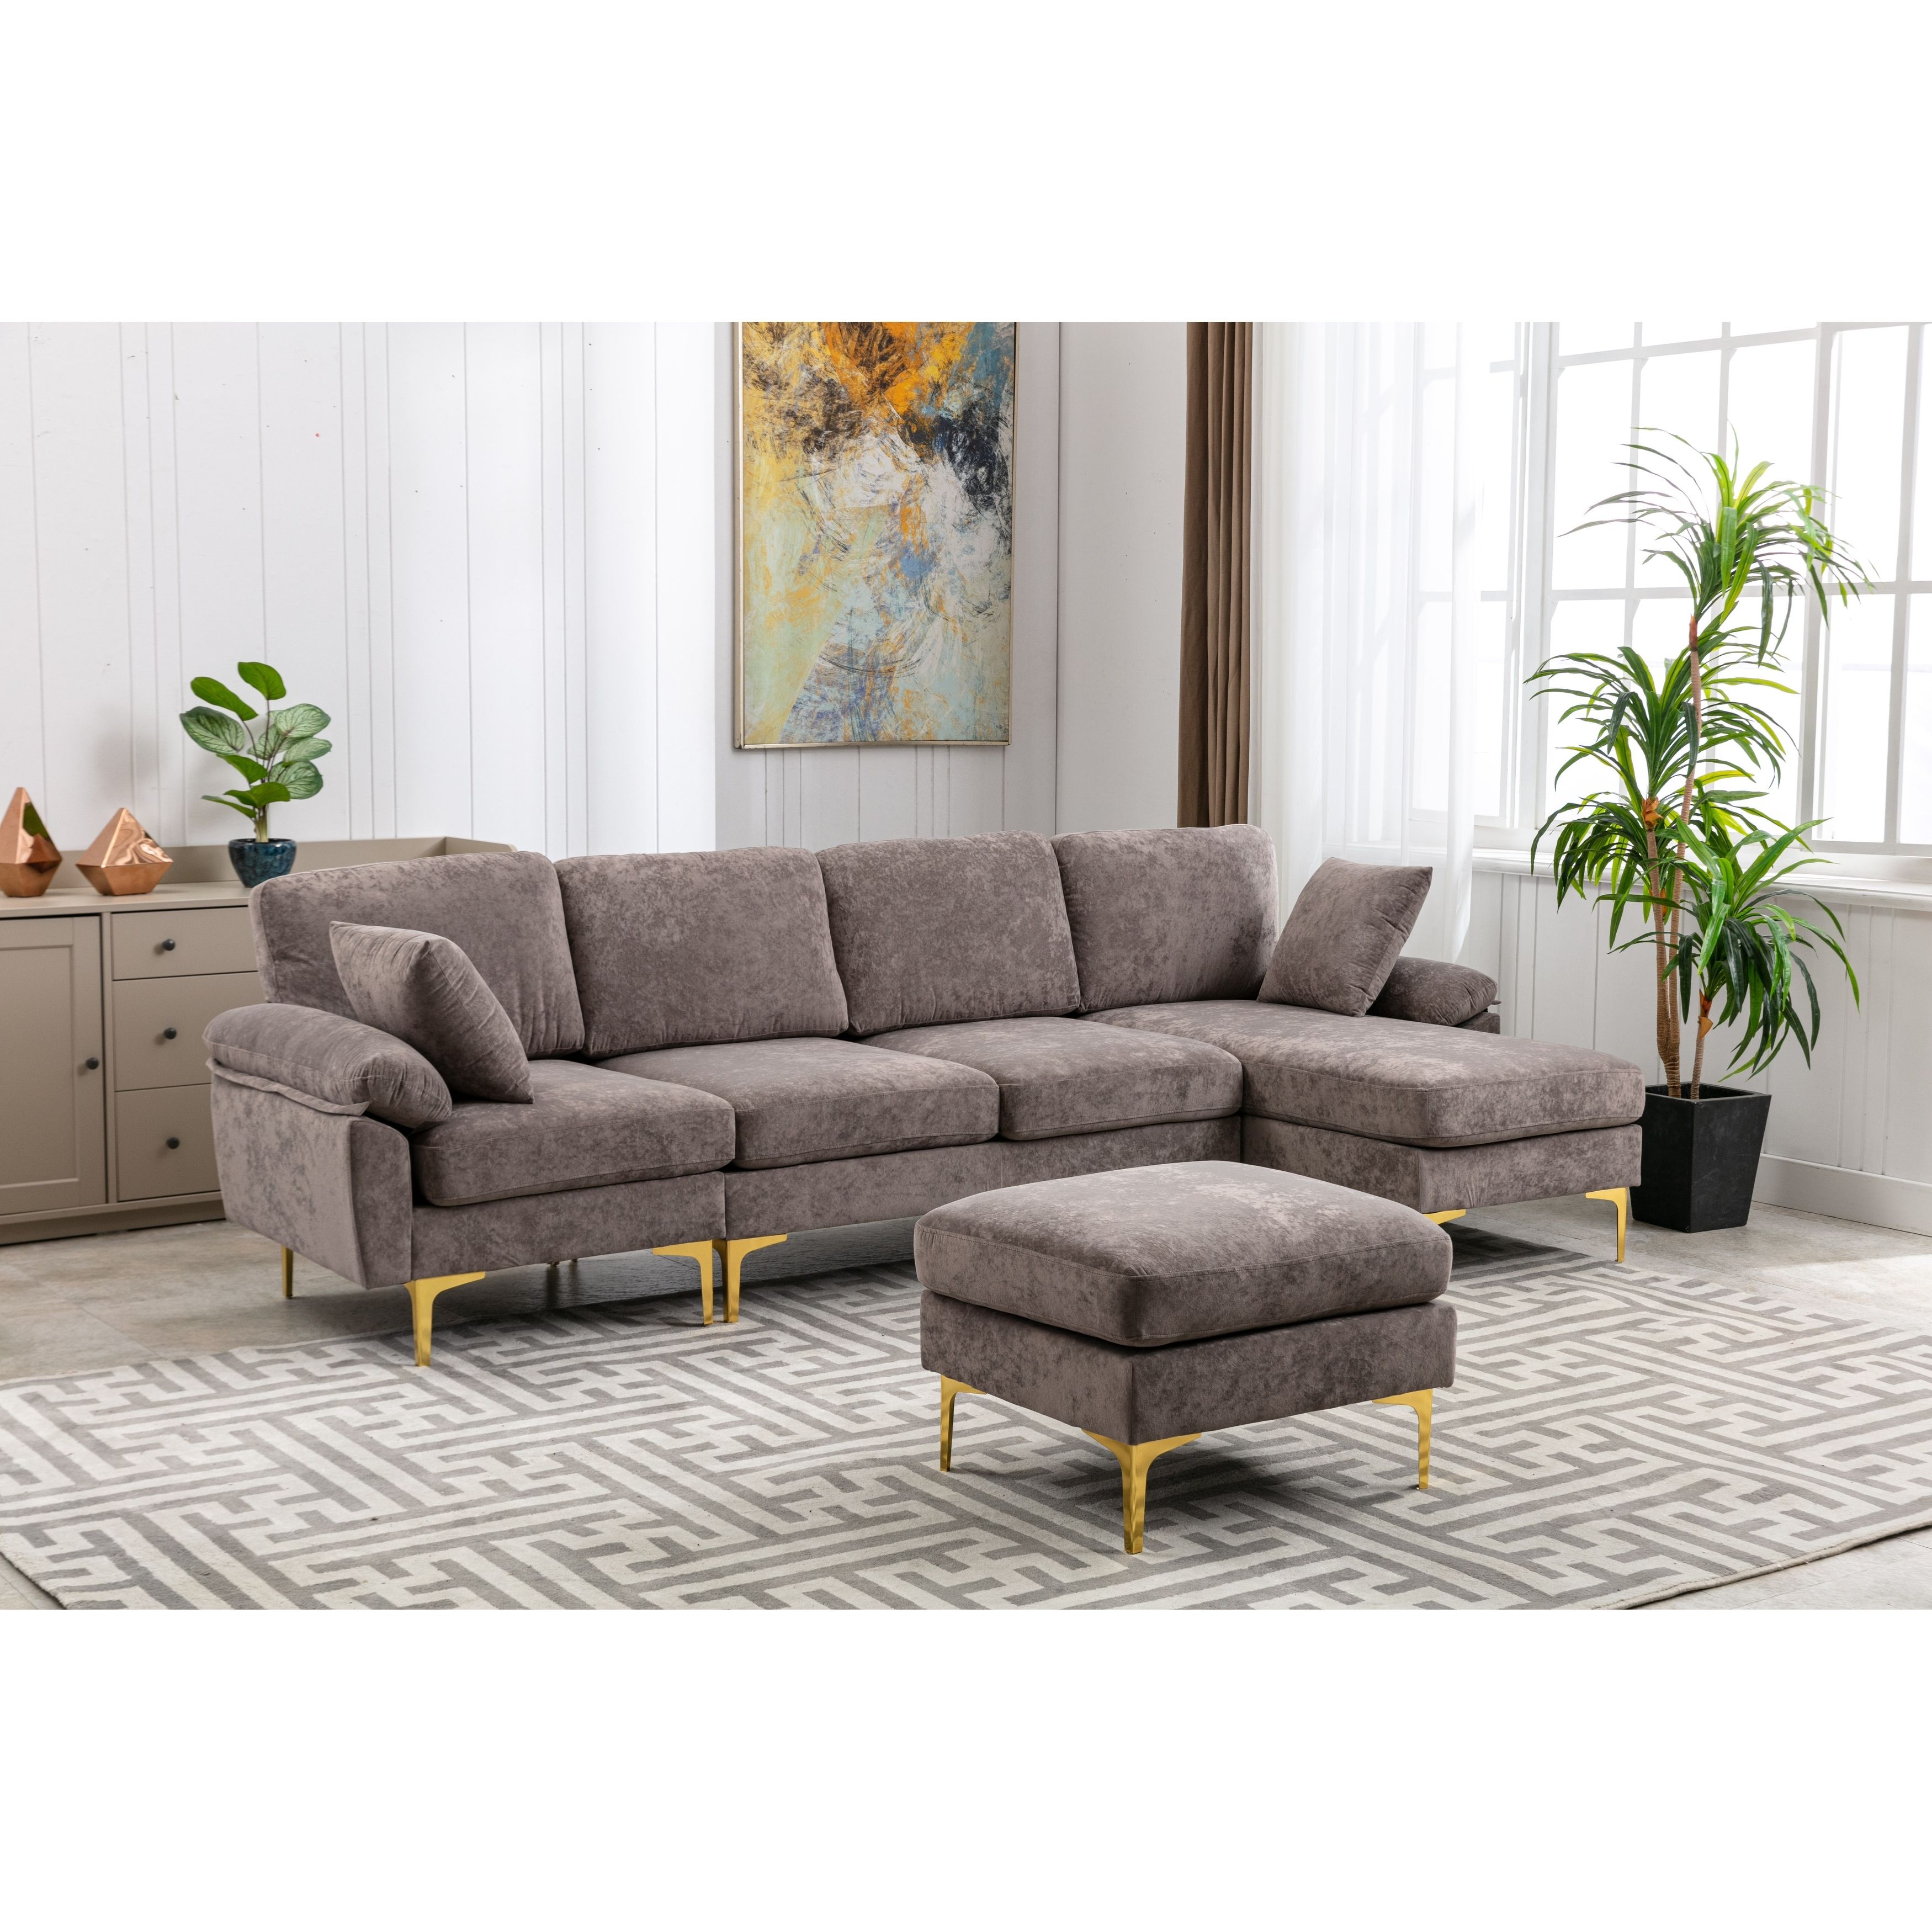 Living Room Sectional Sofa, L Shaped Upholstered Couch With Movable Ottoman,  Convertible Modular Sofa With Gold Metal Legs – On Sale – – 36876876 Throughout Sectional Sofas With Movable Ottoman (Gallery 16 of 20)